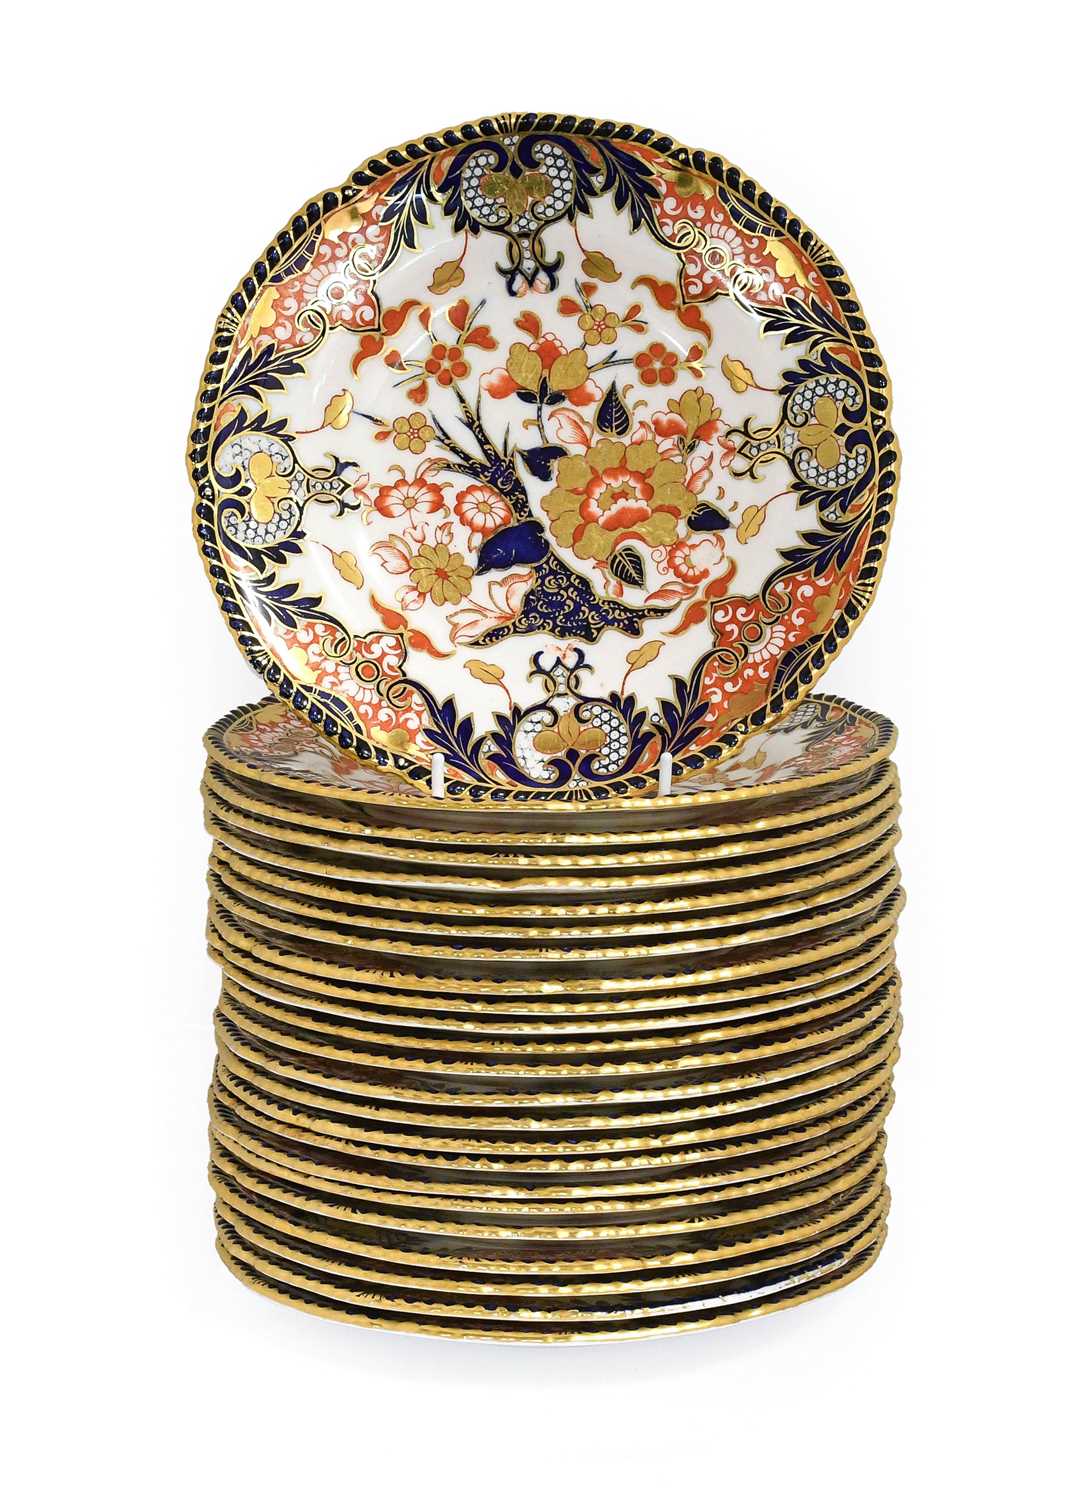 A Royal Crown Derby Porcelain Dinner Service, late 19th century, decorated in the King's Imari - Image 4 of 7